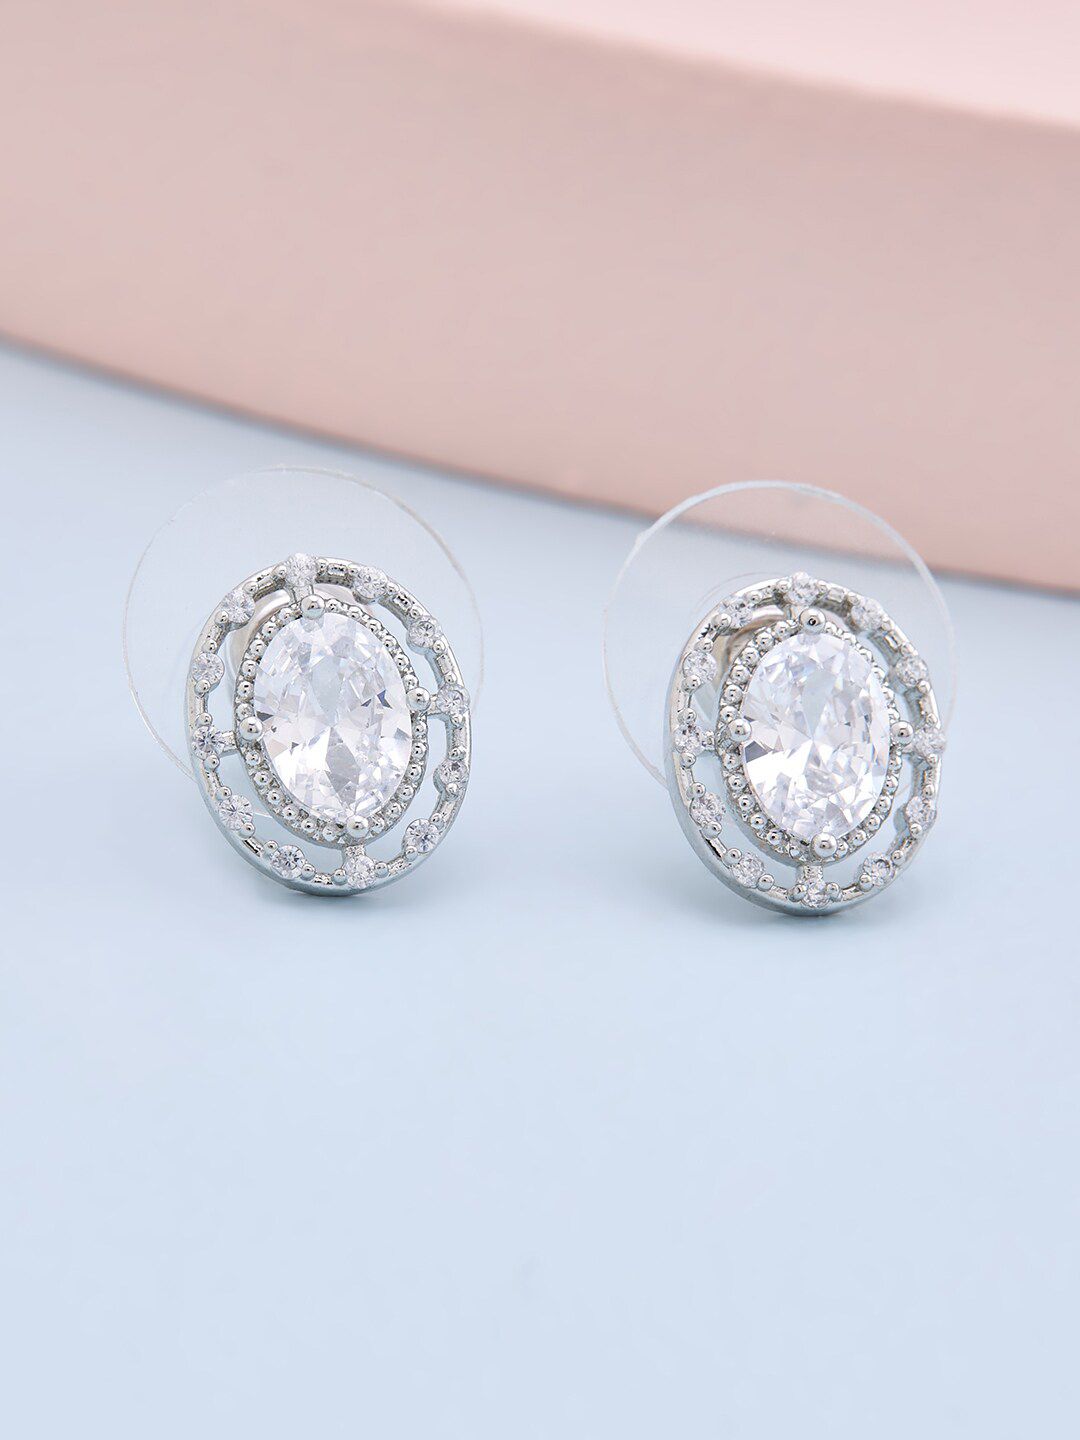 Kushal's Fashion Jewellery White Oval Studs Earrings Price in India